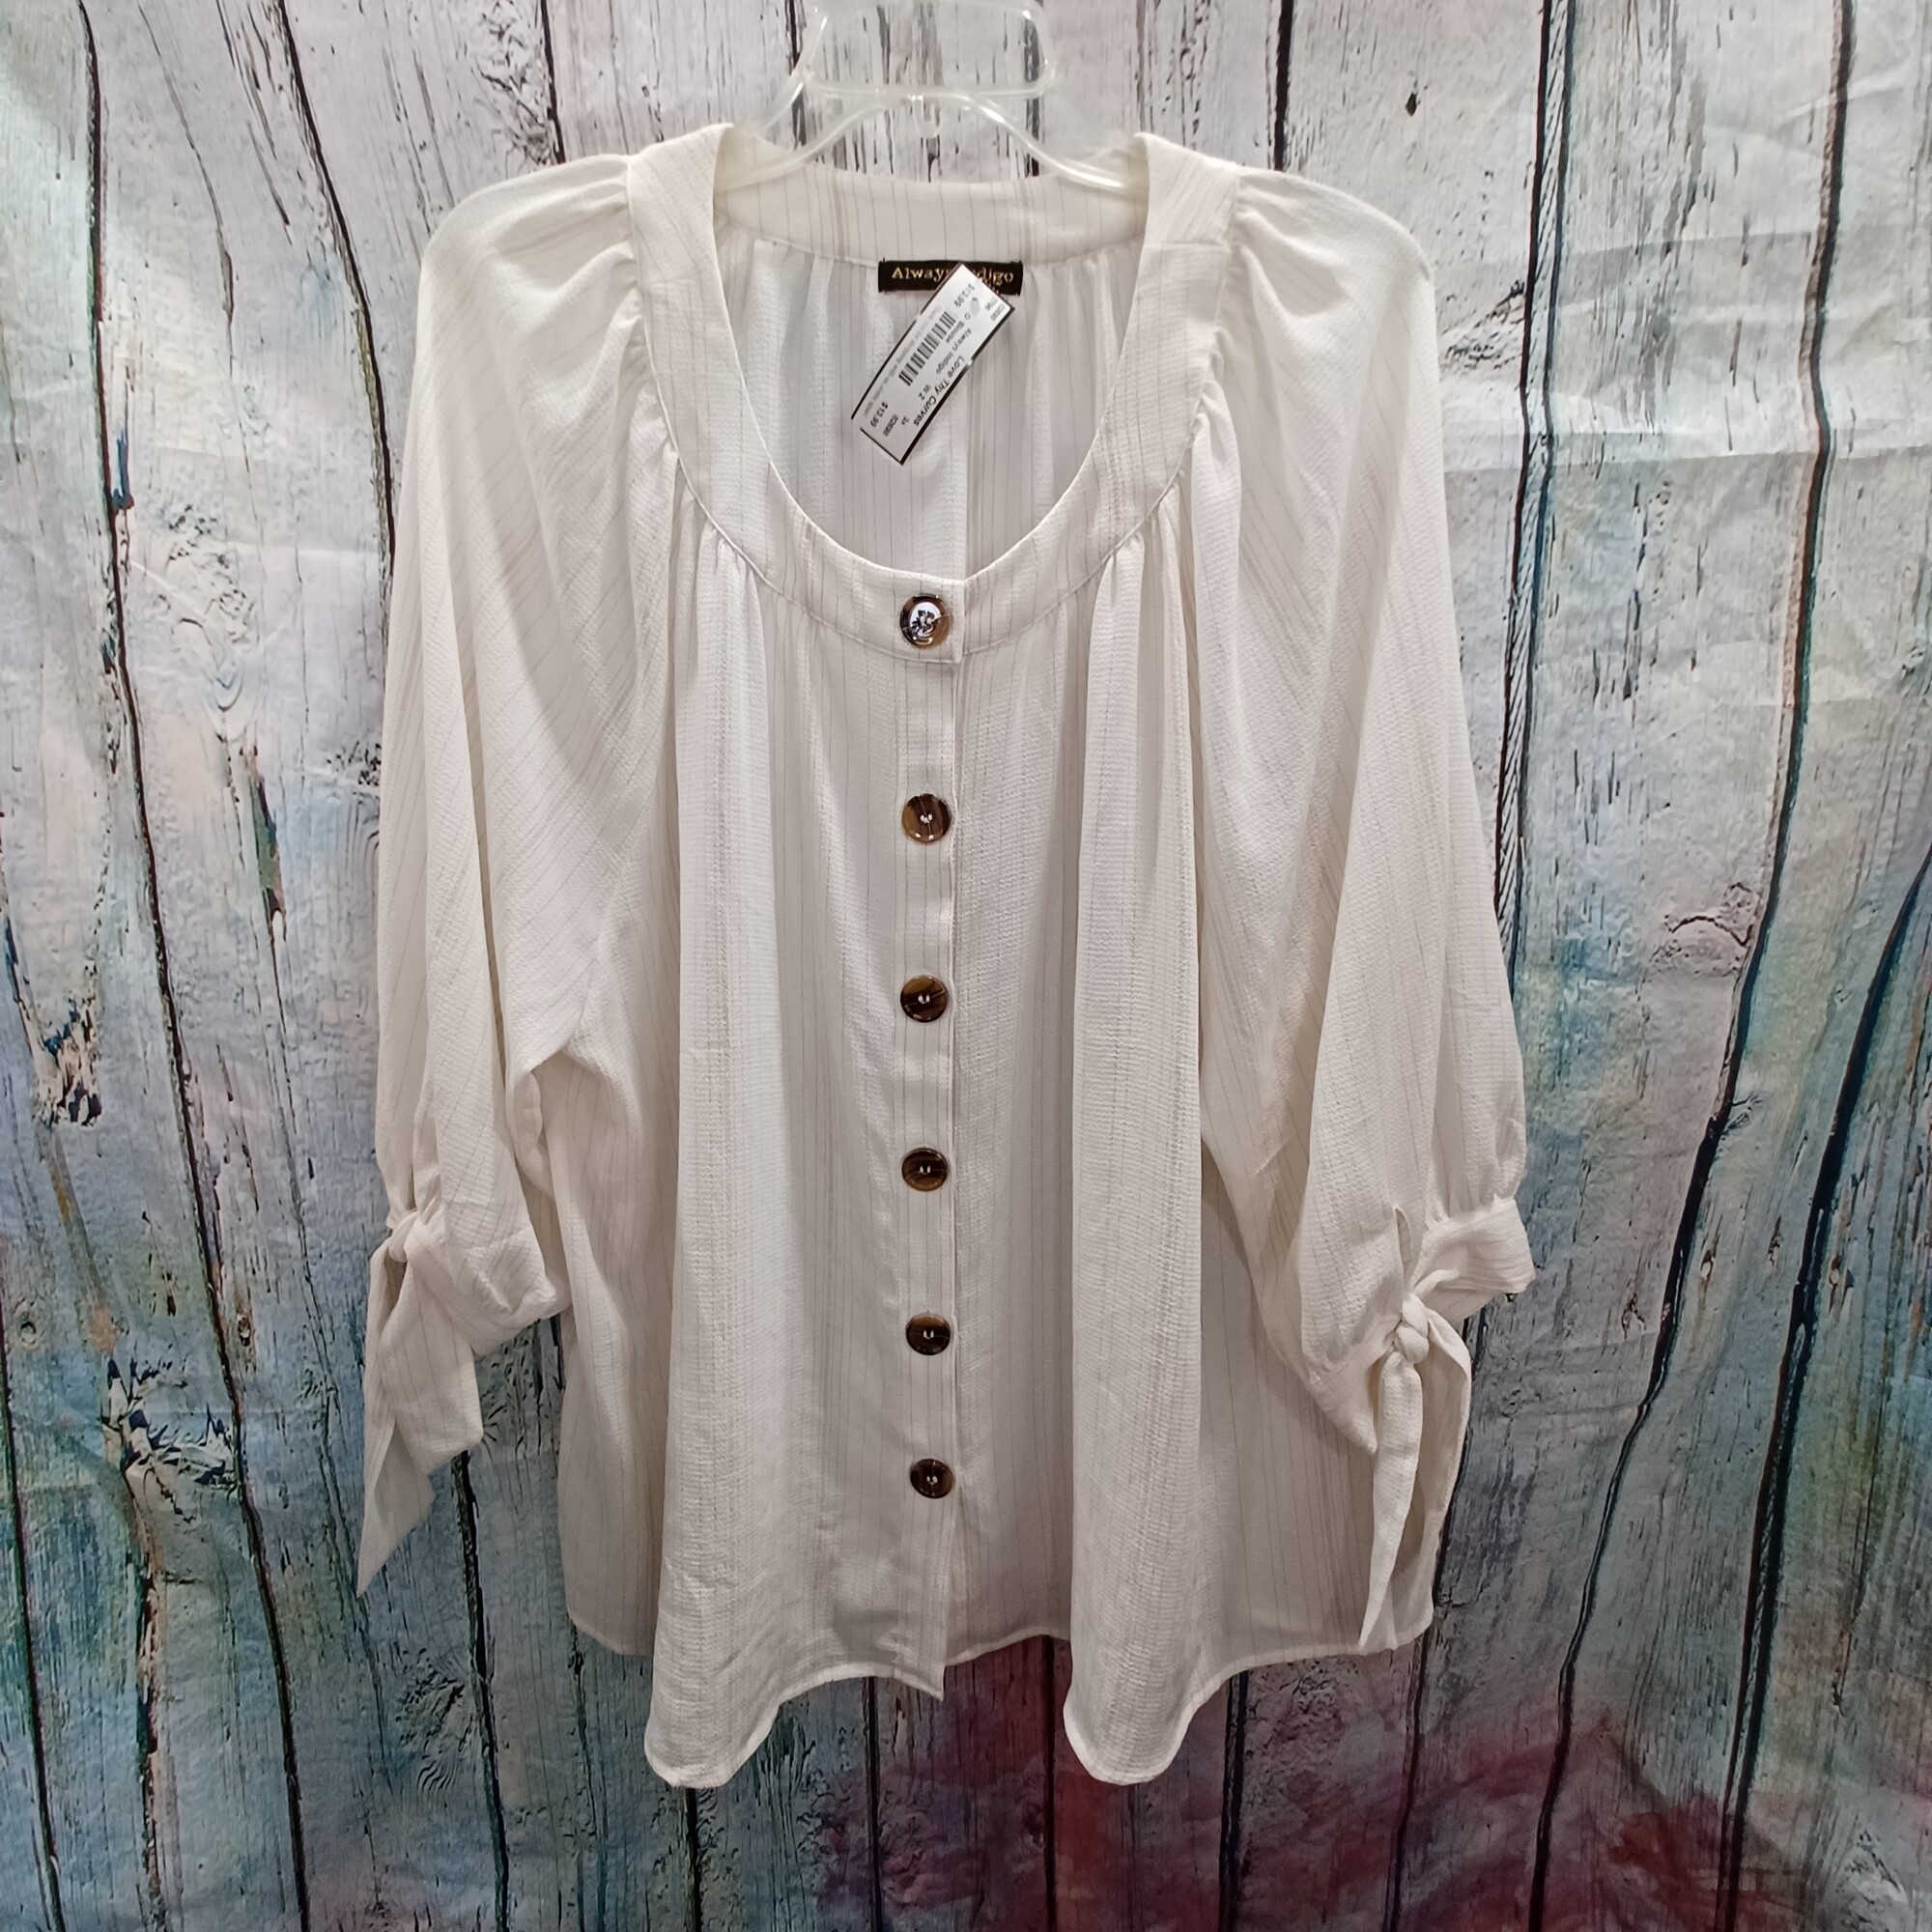 Great lightweight blouse  that is perfect for the office or even paired with your favorite jeans for a put together girl on the go look. White, gold metallic threading in vertical stripes and half sleeves